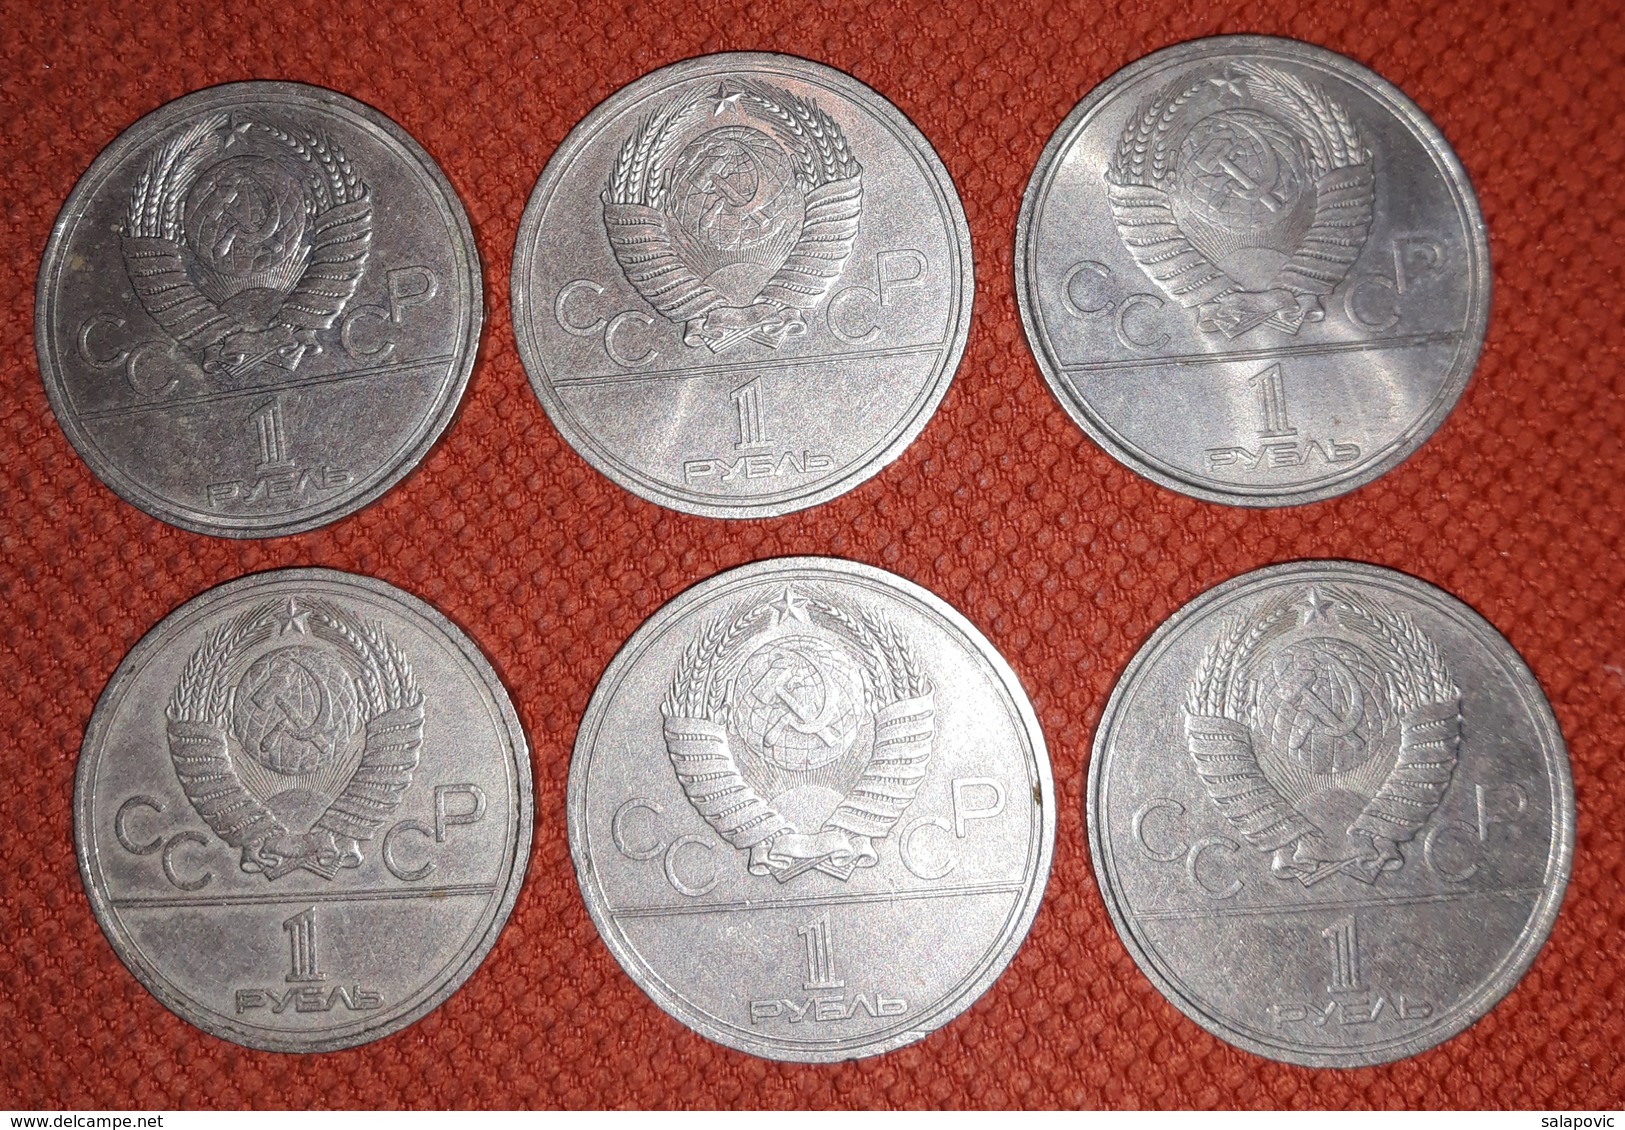 RUSSIA OLYMPIC GAMES 1 ROUBLE FULL COIN SET MOSCOW 1980 - Russia